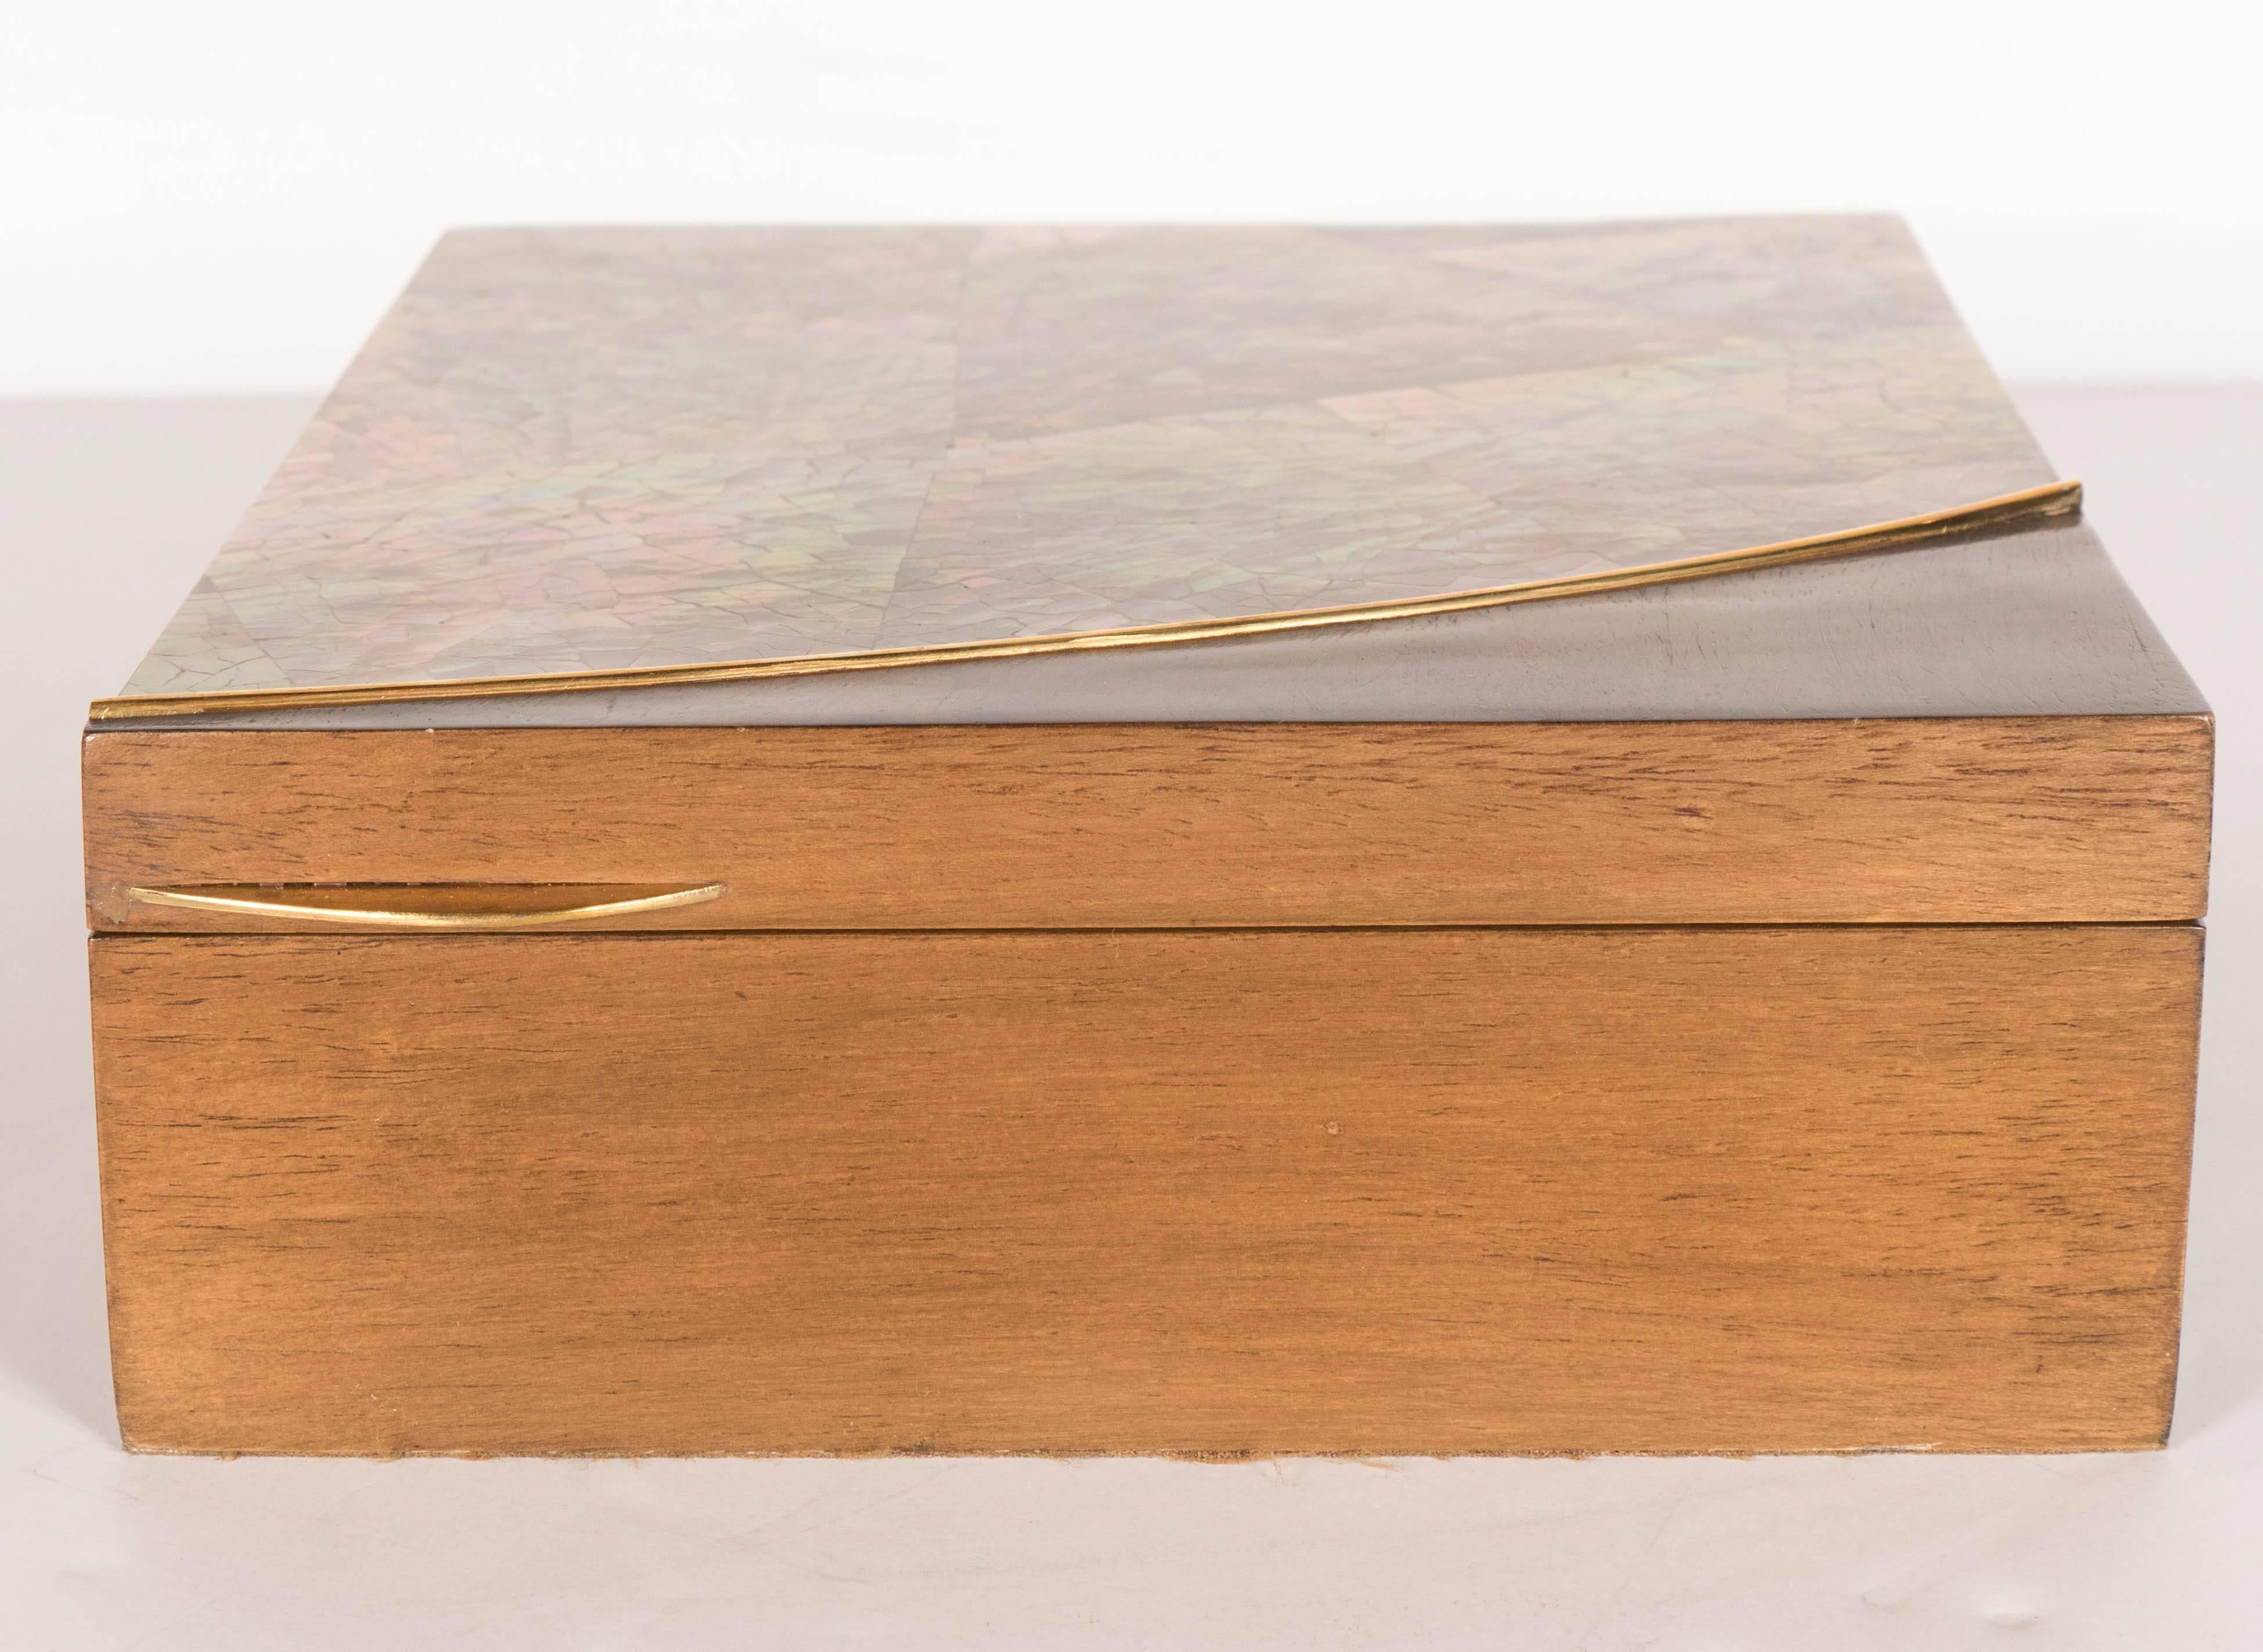 A truly stunning champagne-colored mother-of-pearl and hand-rubbed walnut box. A gorgeous mother of pearl shell top is bordered by a gold-plated inlay. A curved lid handle adorns the top. The interiors is lined with mocha suede. This piece is in